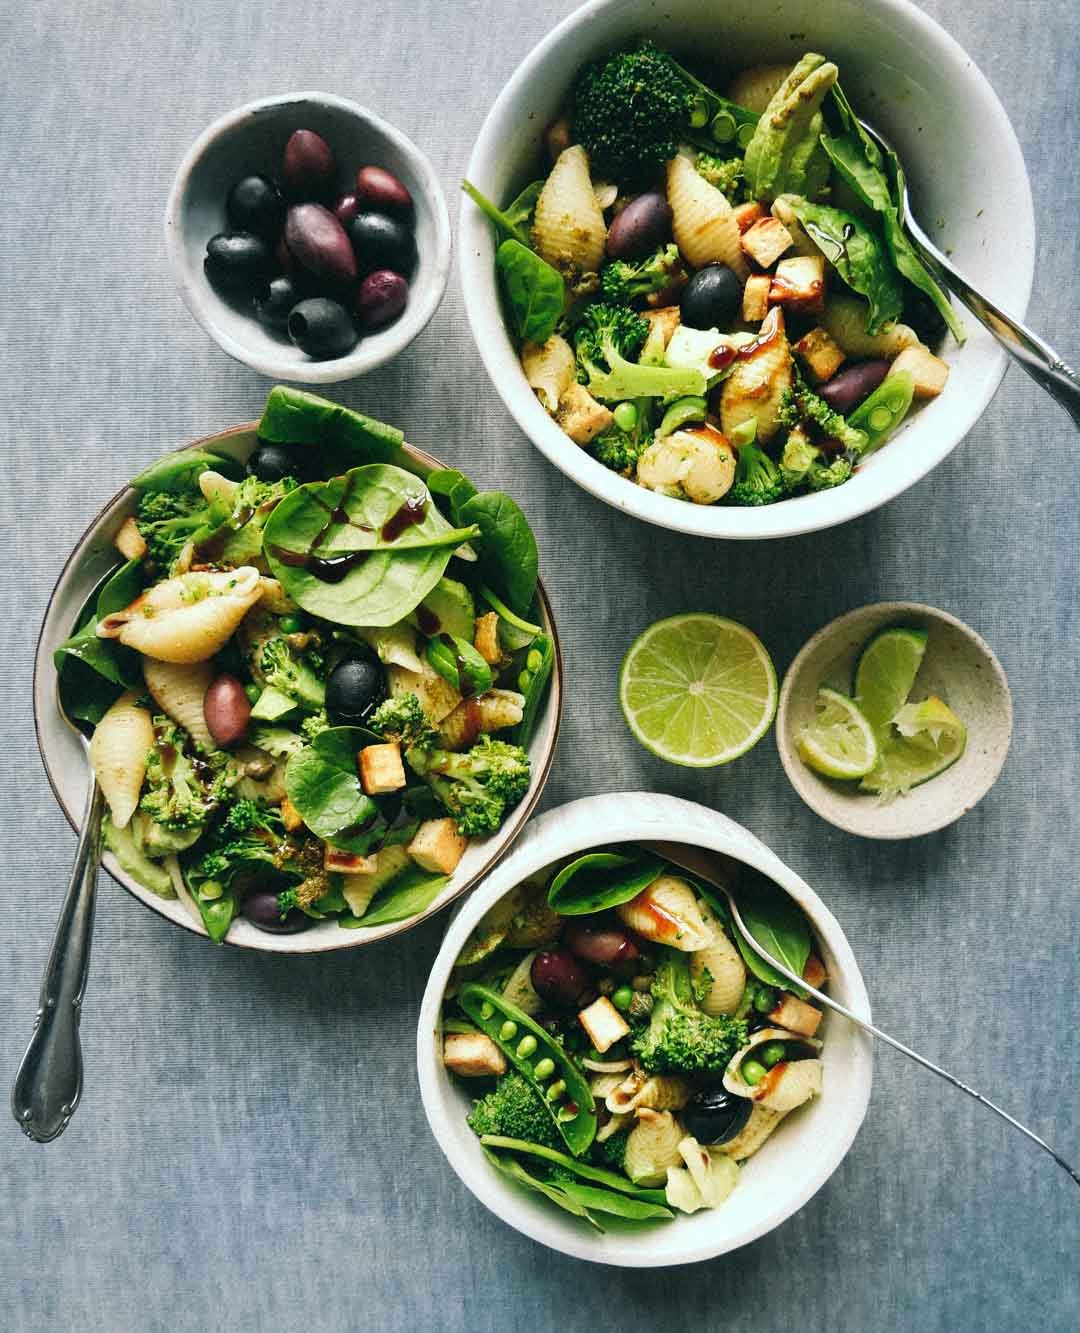 Green Pasta Salad Healthy 15 Minute Recipe With Tofu